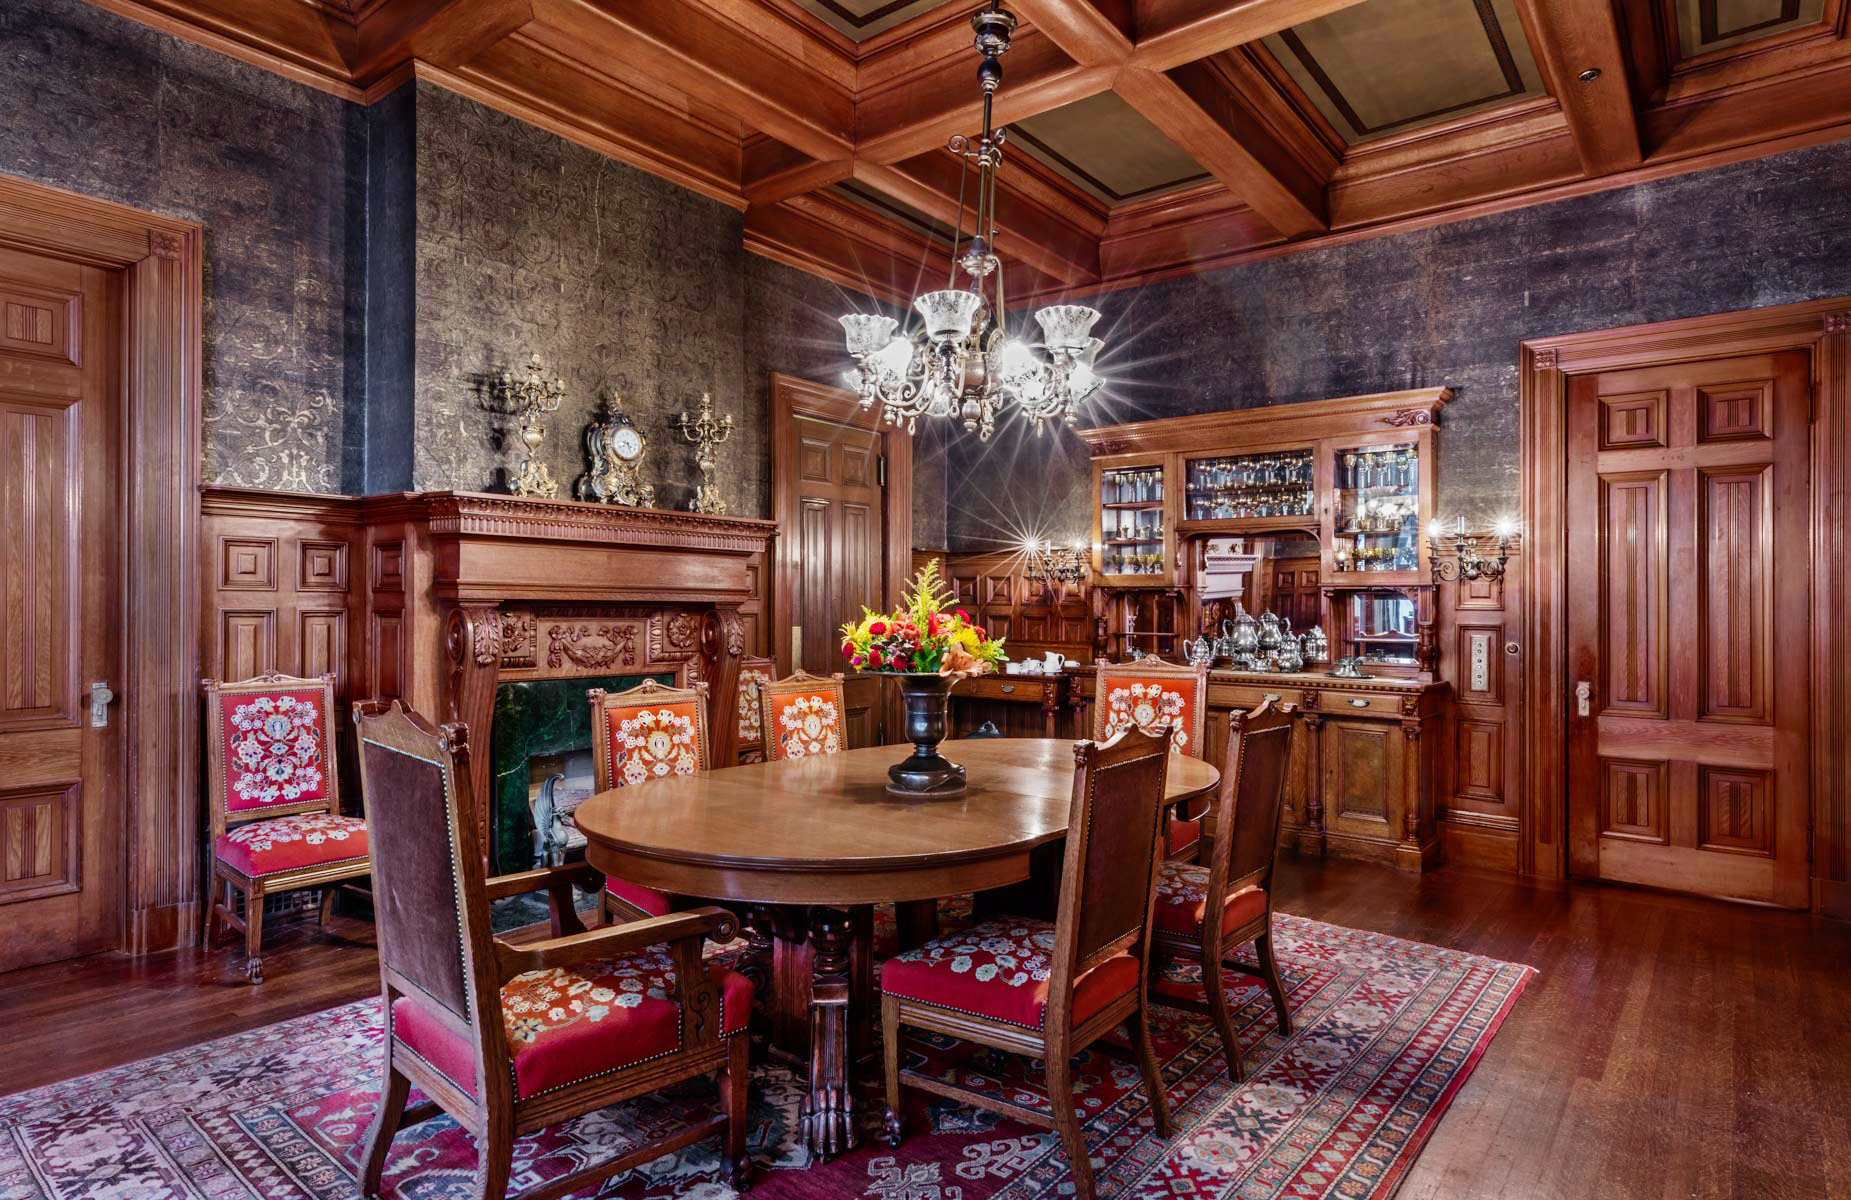 An ornate dining room with a round wooden table, chairs, a bar area, a fireplace, and rich wood paneling.